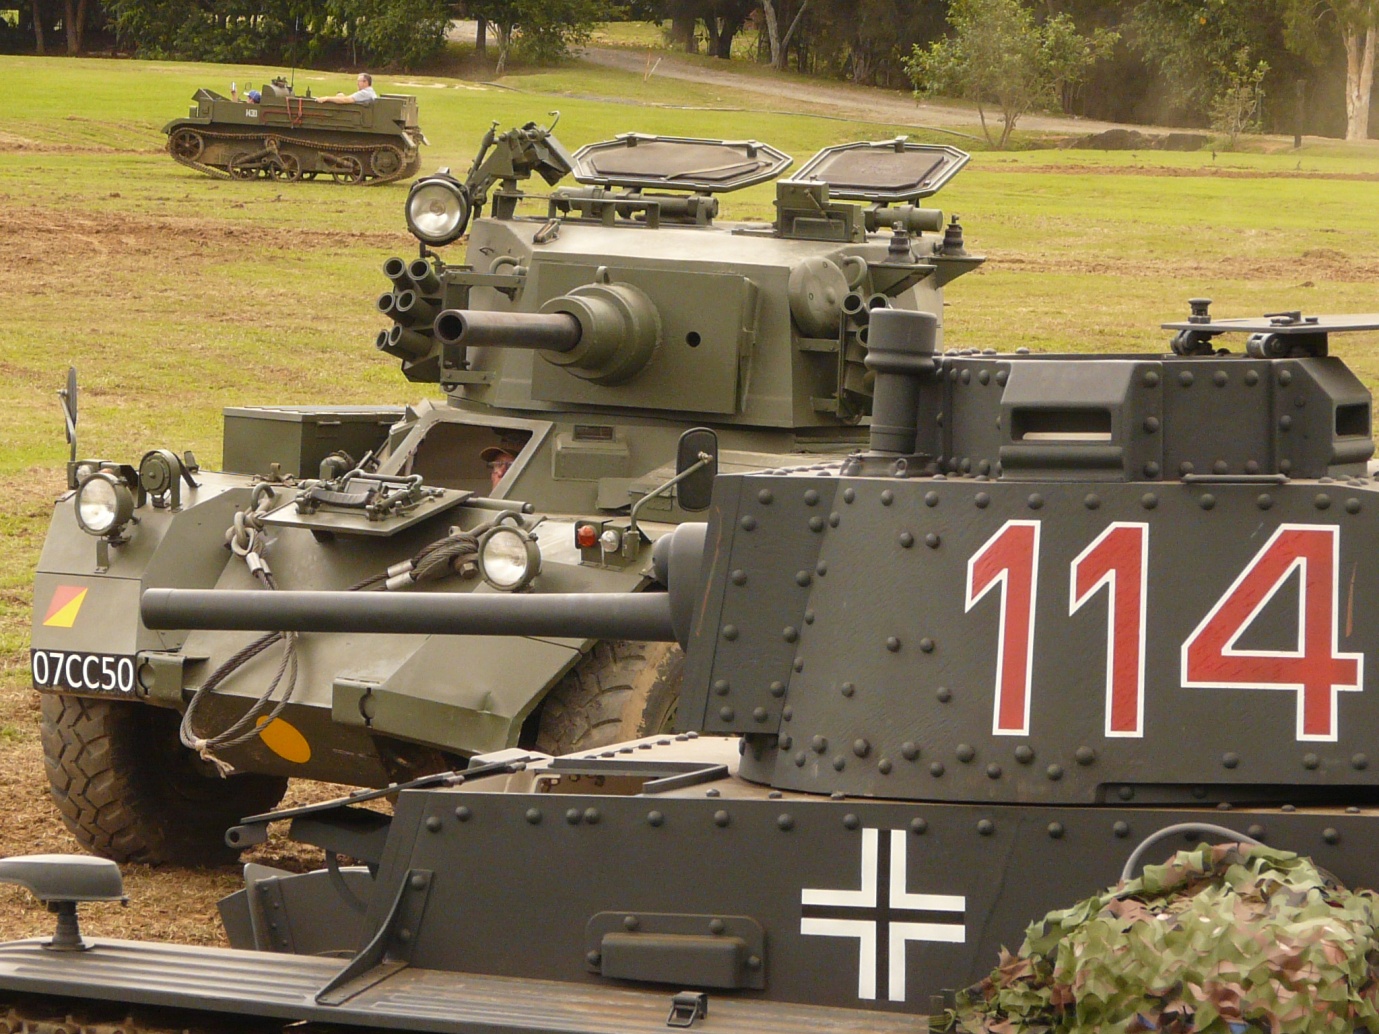 All manner of armoured vehicles were available for rides around the dirt track. 